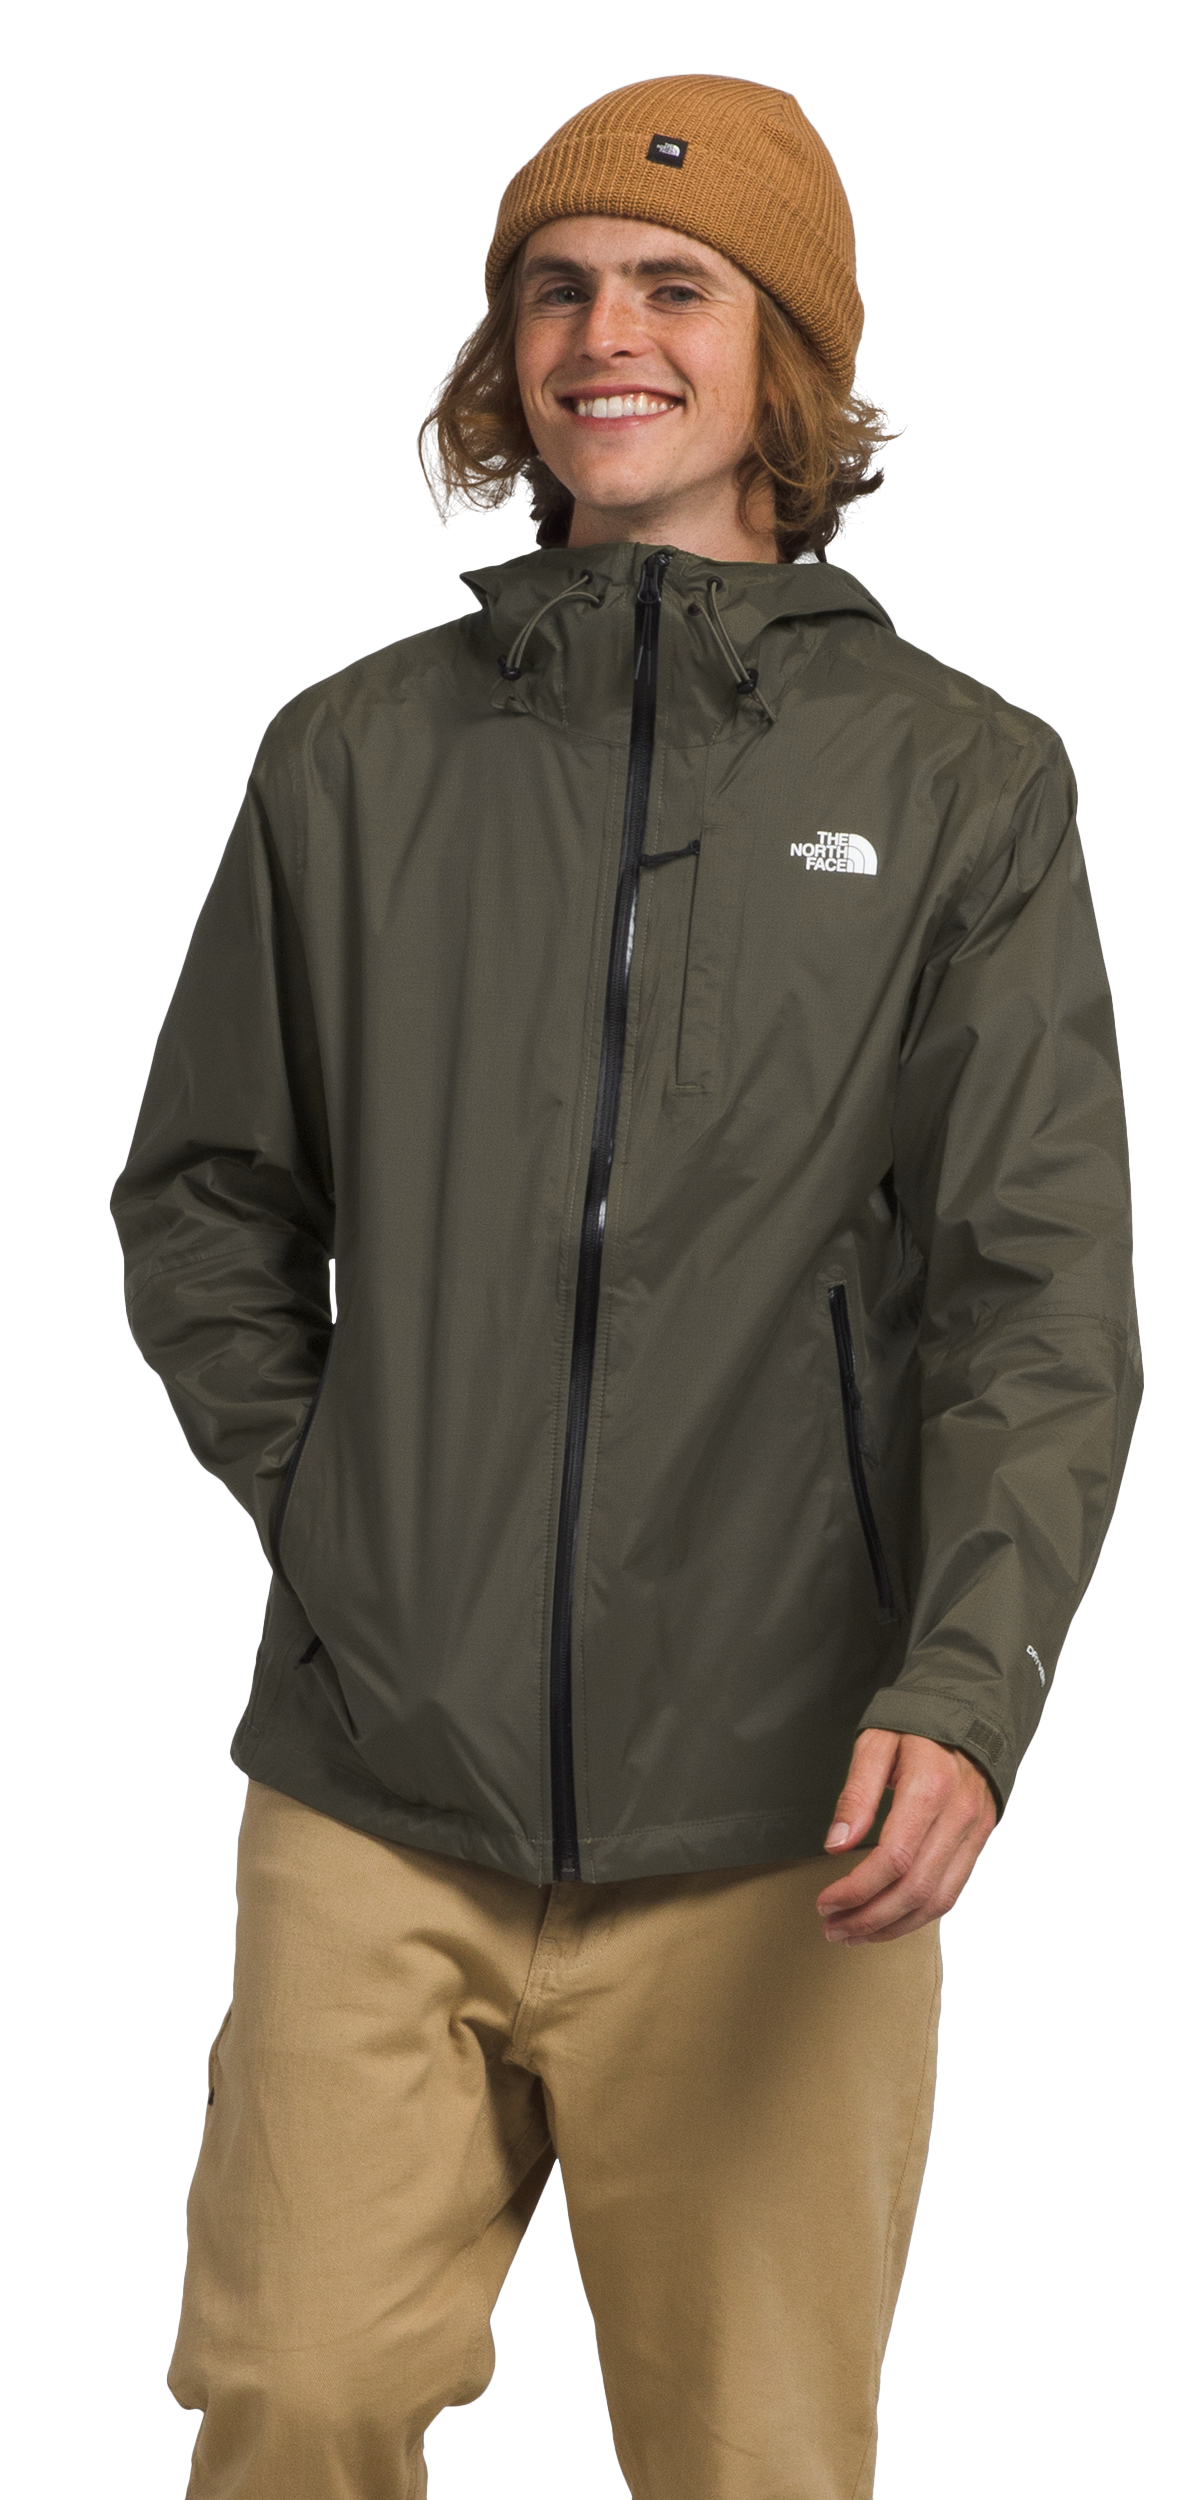 The North Face Alta Vista Jacket for Men - New Taupe Green - M